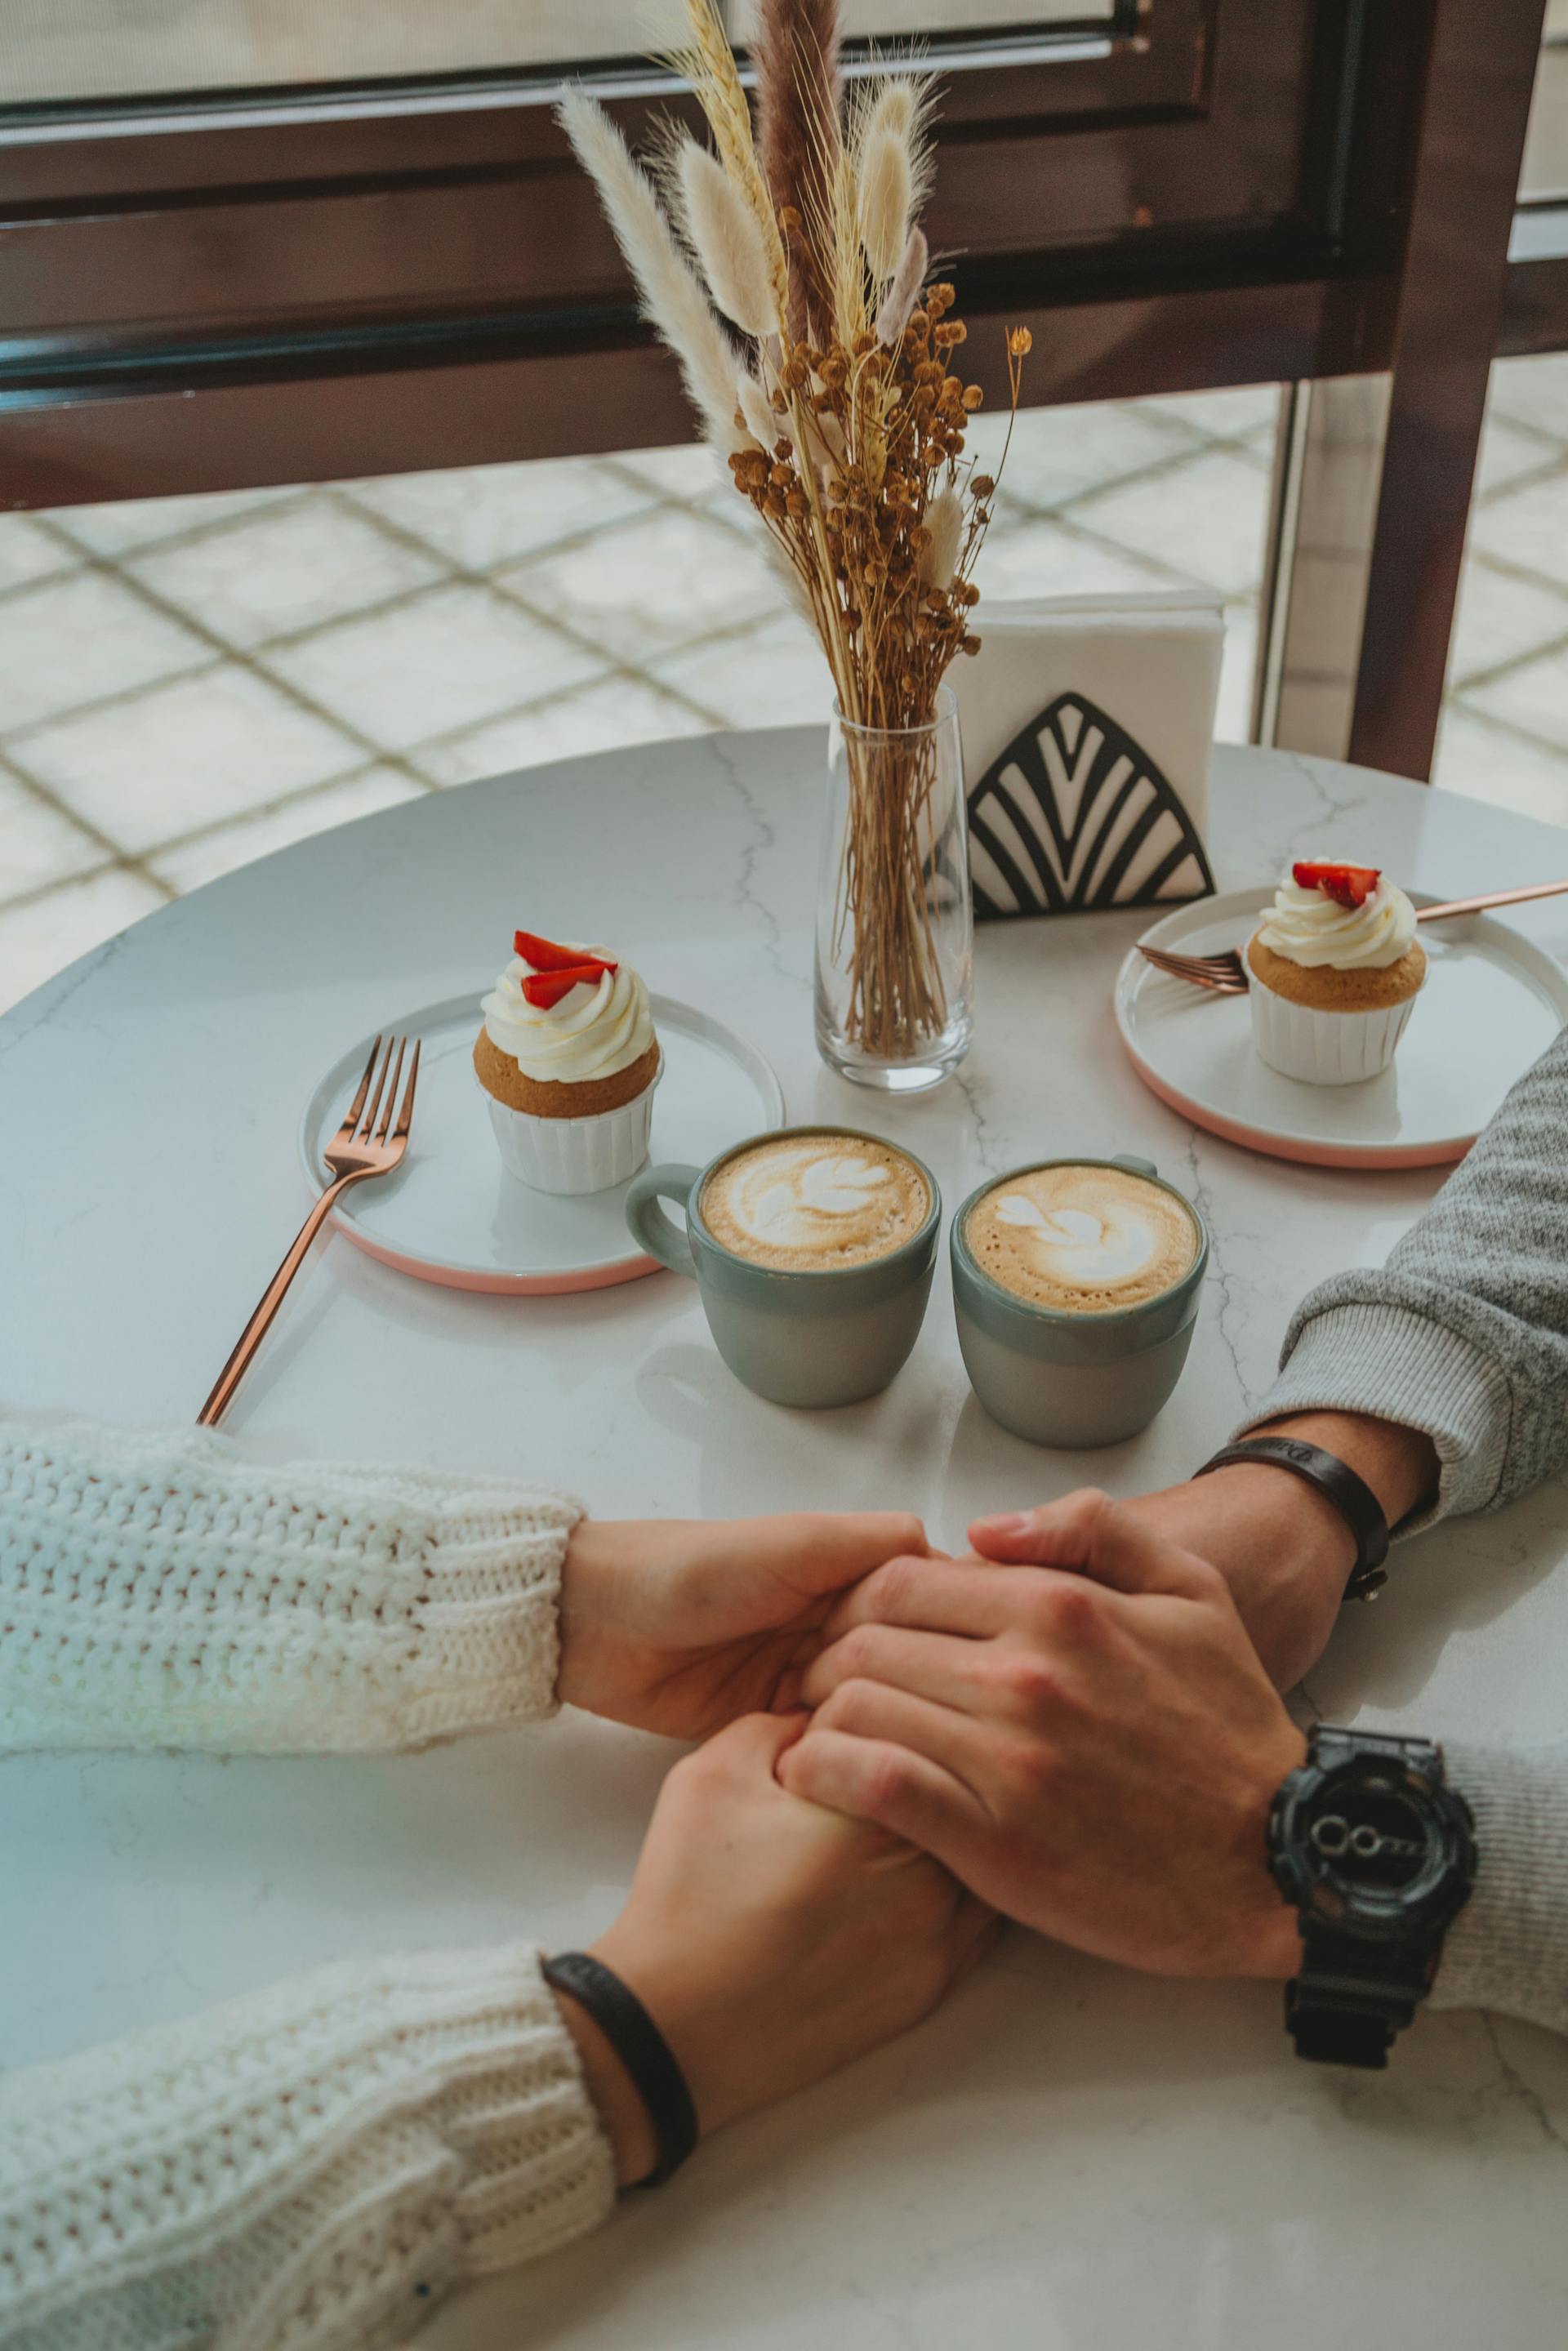 A couple holding hands at a restaurant | Source: Pexels